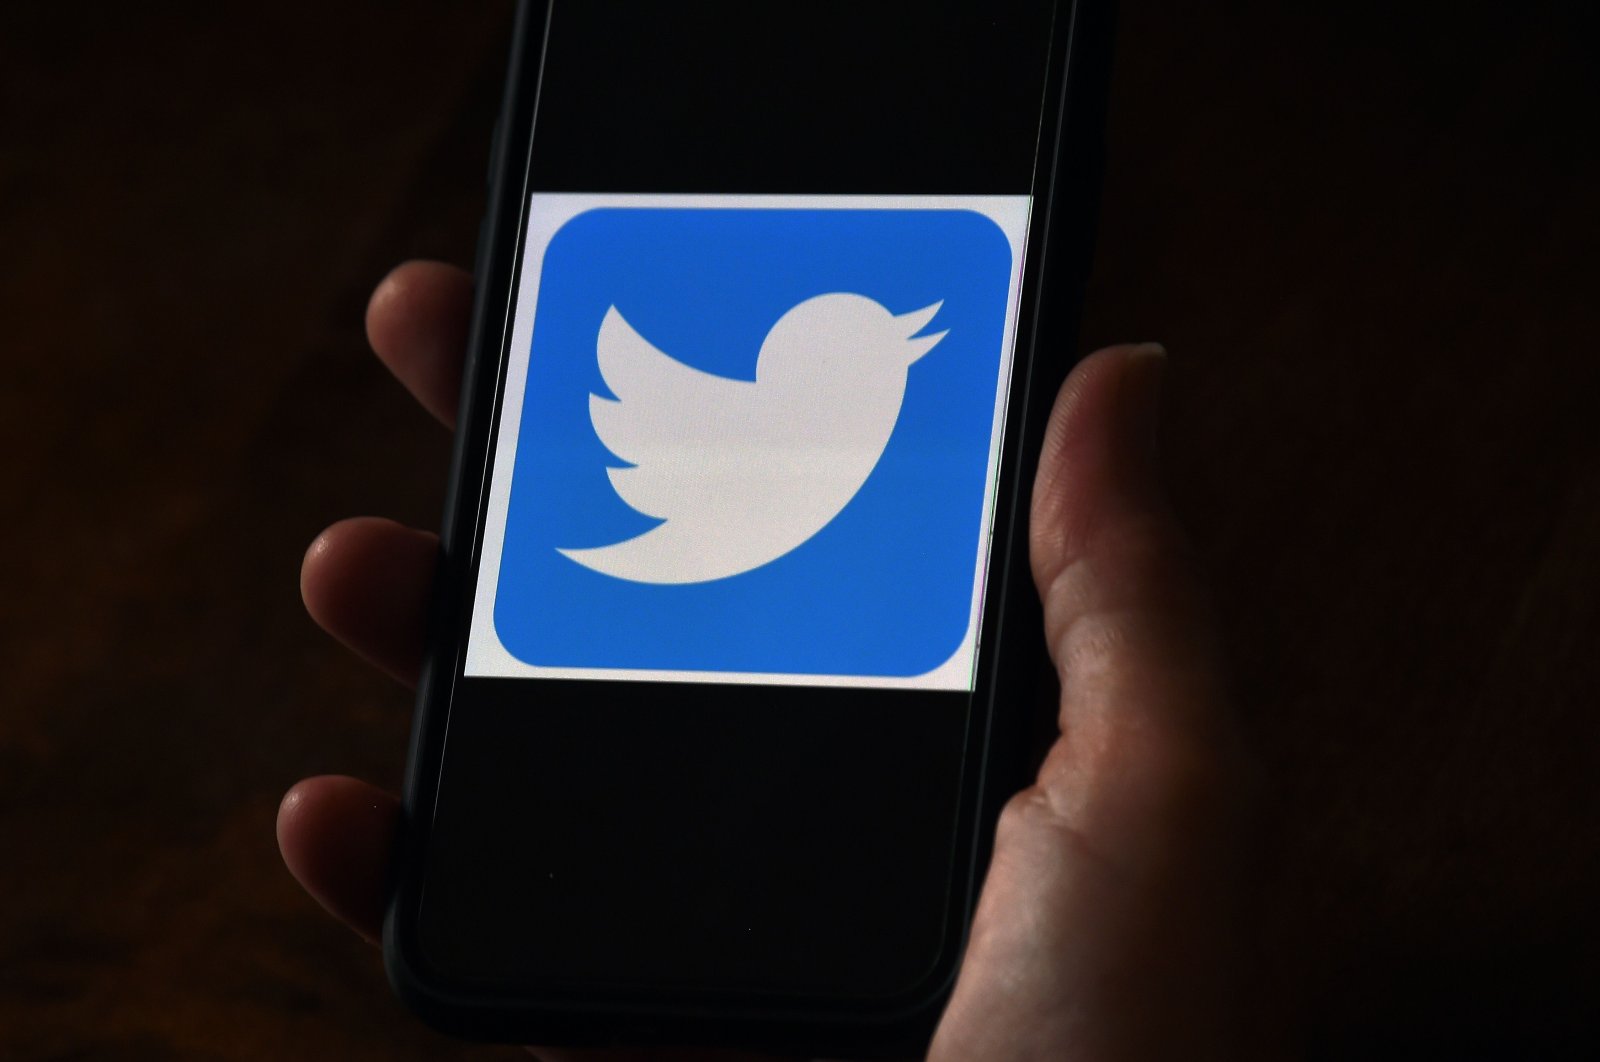  In this file photo illustration, a Twitter logo is displayed on a mobile phone on May 27, 2020, in Arlington, Virginia. (AFP Photo)